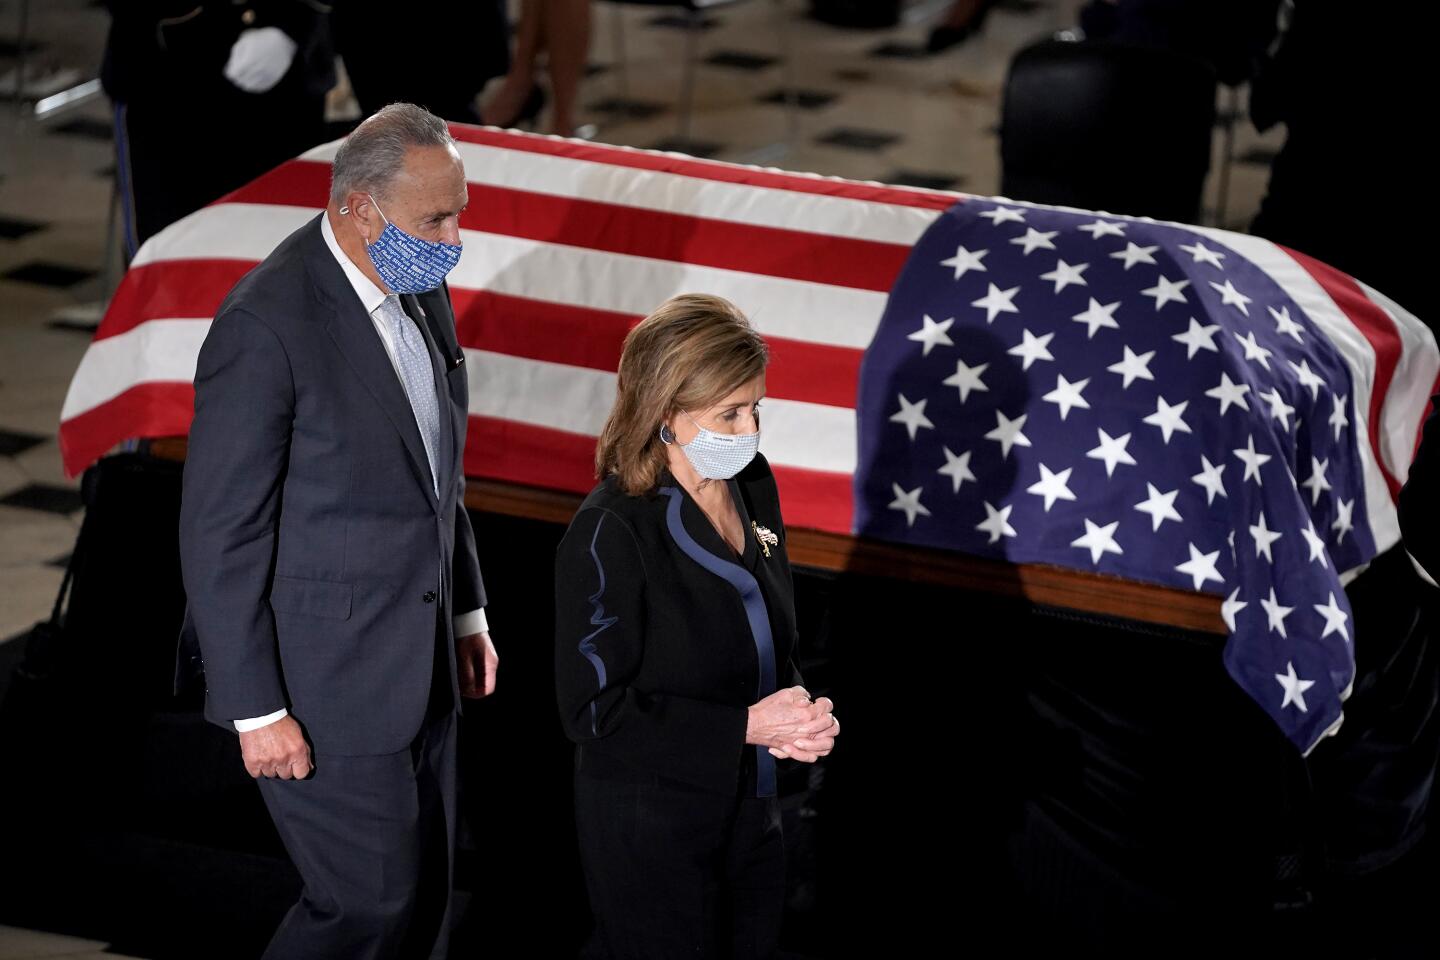 Rep. Nancy Pelosi and Sen. Charles E. Schumer pay their respects at the casket of Justice Ruth Bader Ginsburg